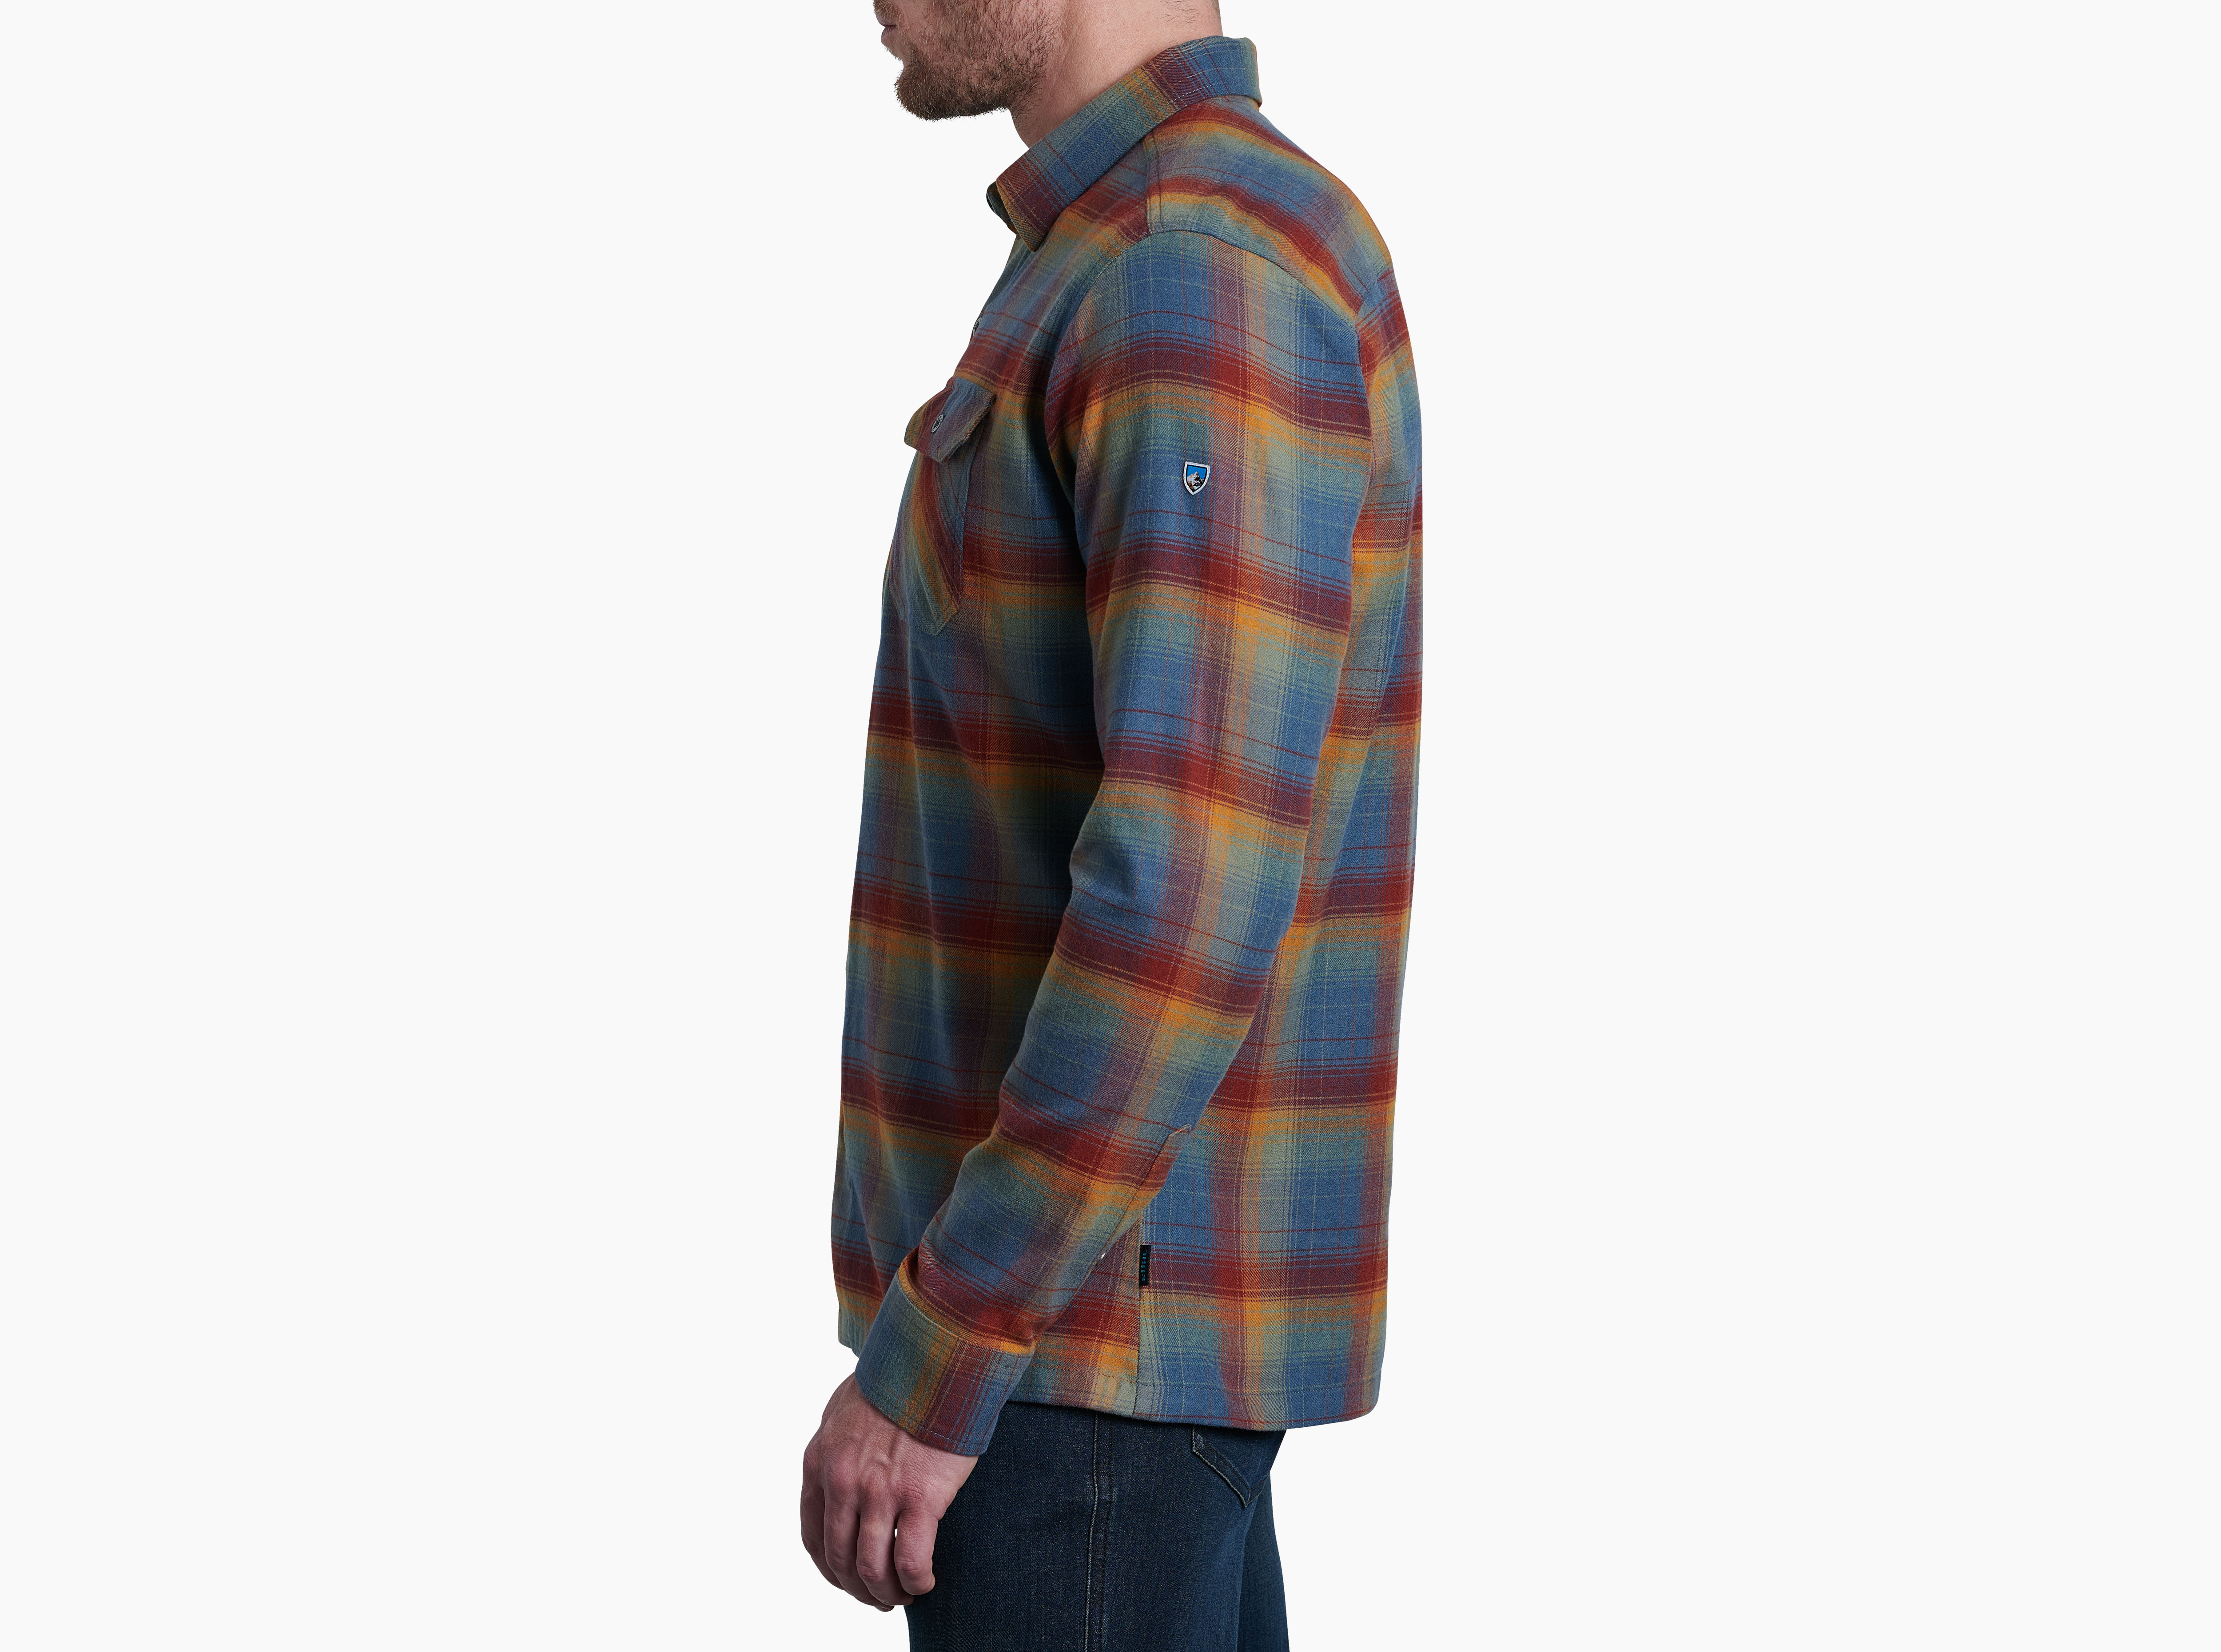 Kuhl Law Flannel - Men's Mineral Ice, M